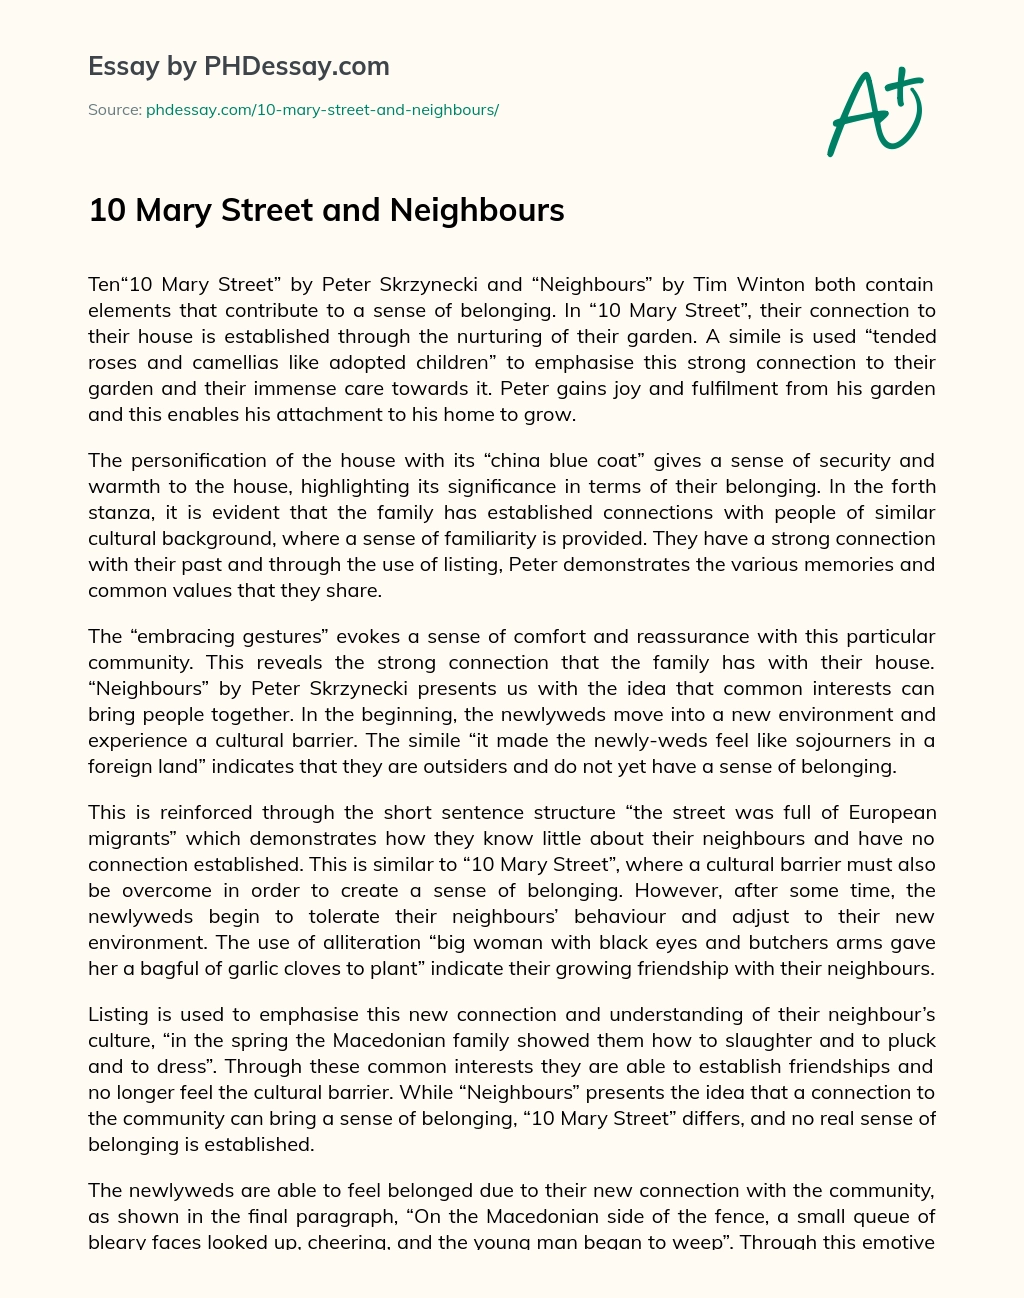 10 Mary Street and Neighbours essay